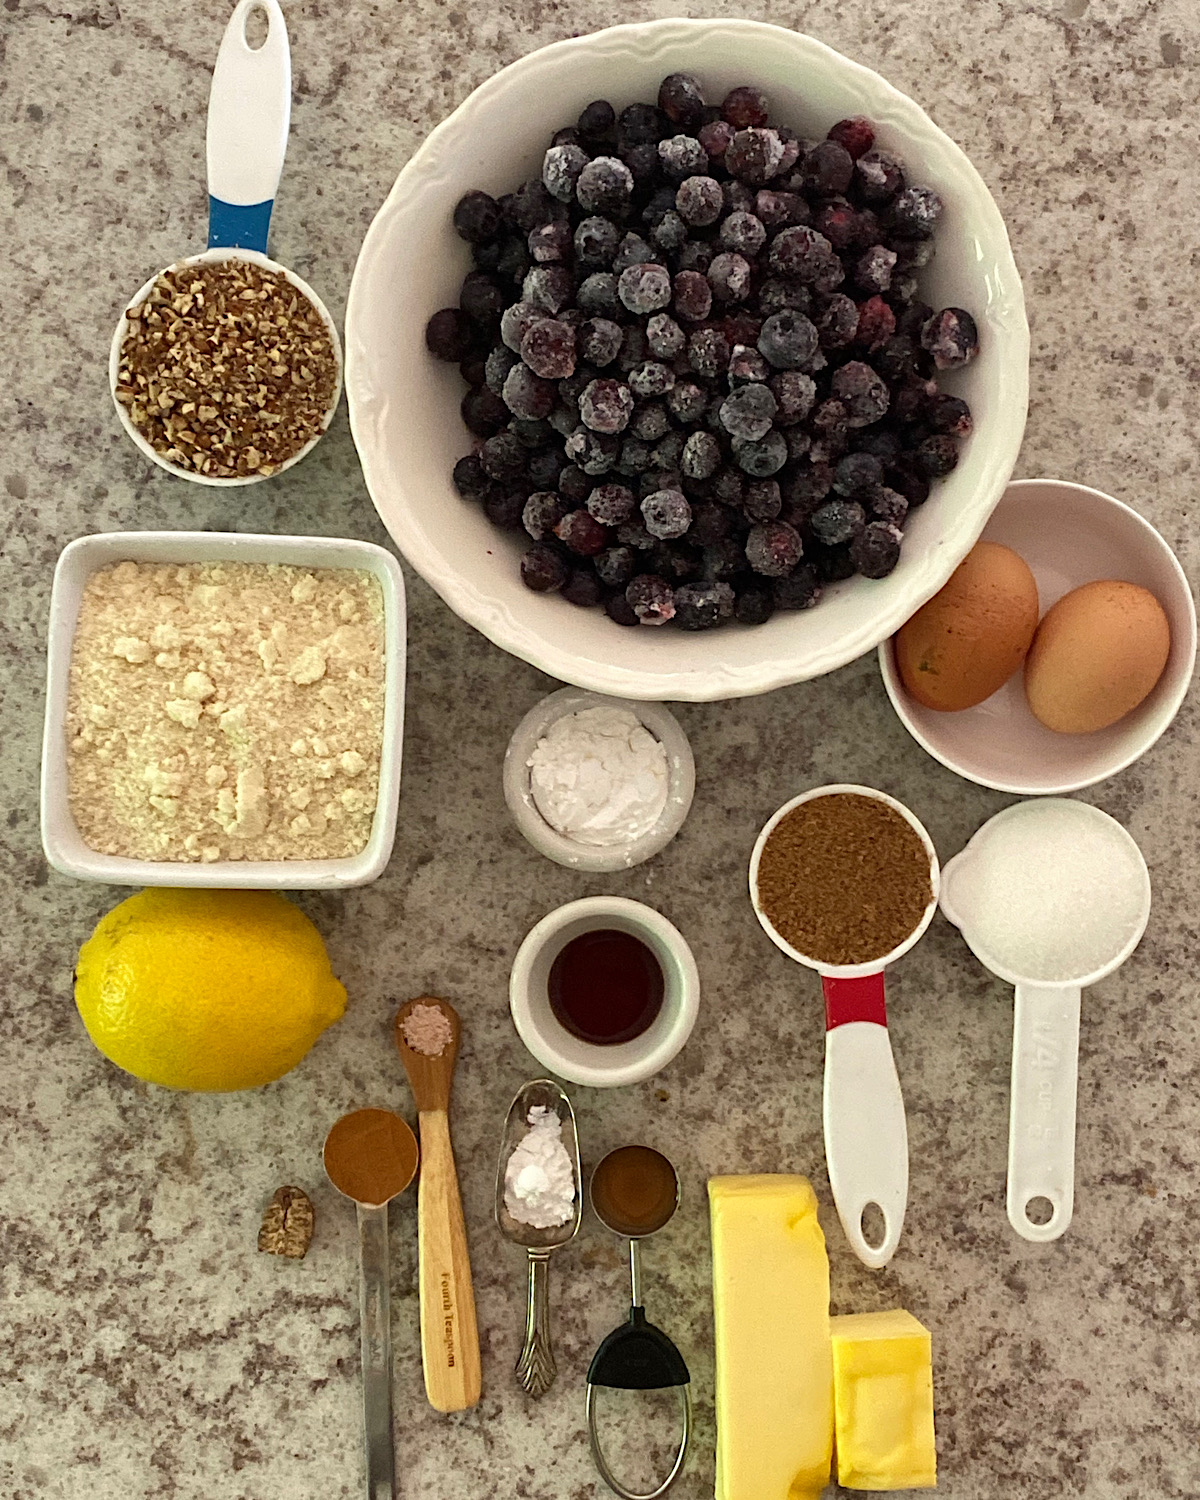 Ingredients for low carb blueberry crumble